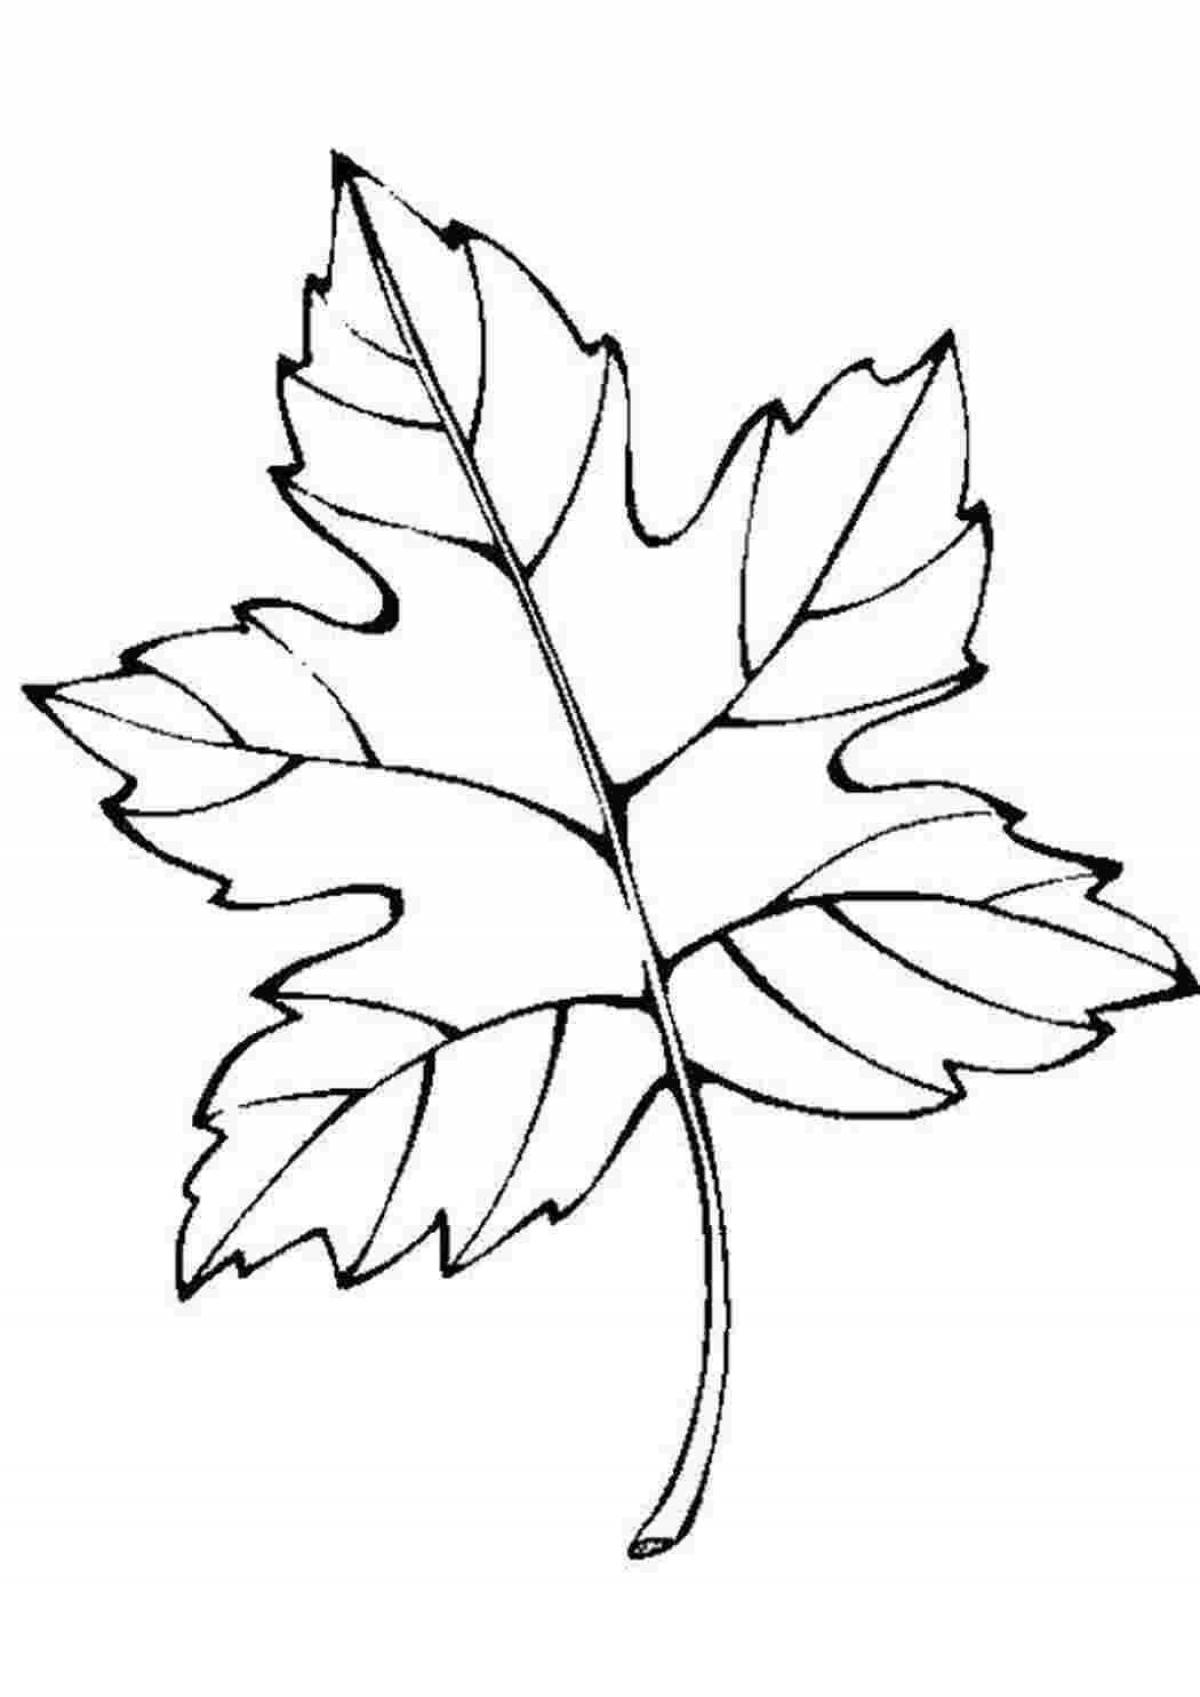 Cute leaves coloring book for kids